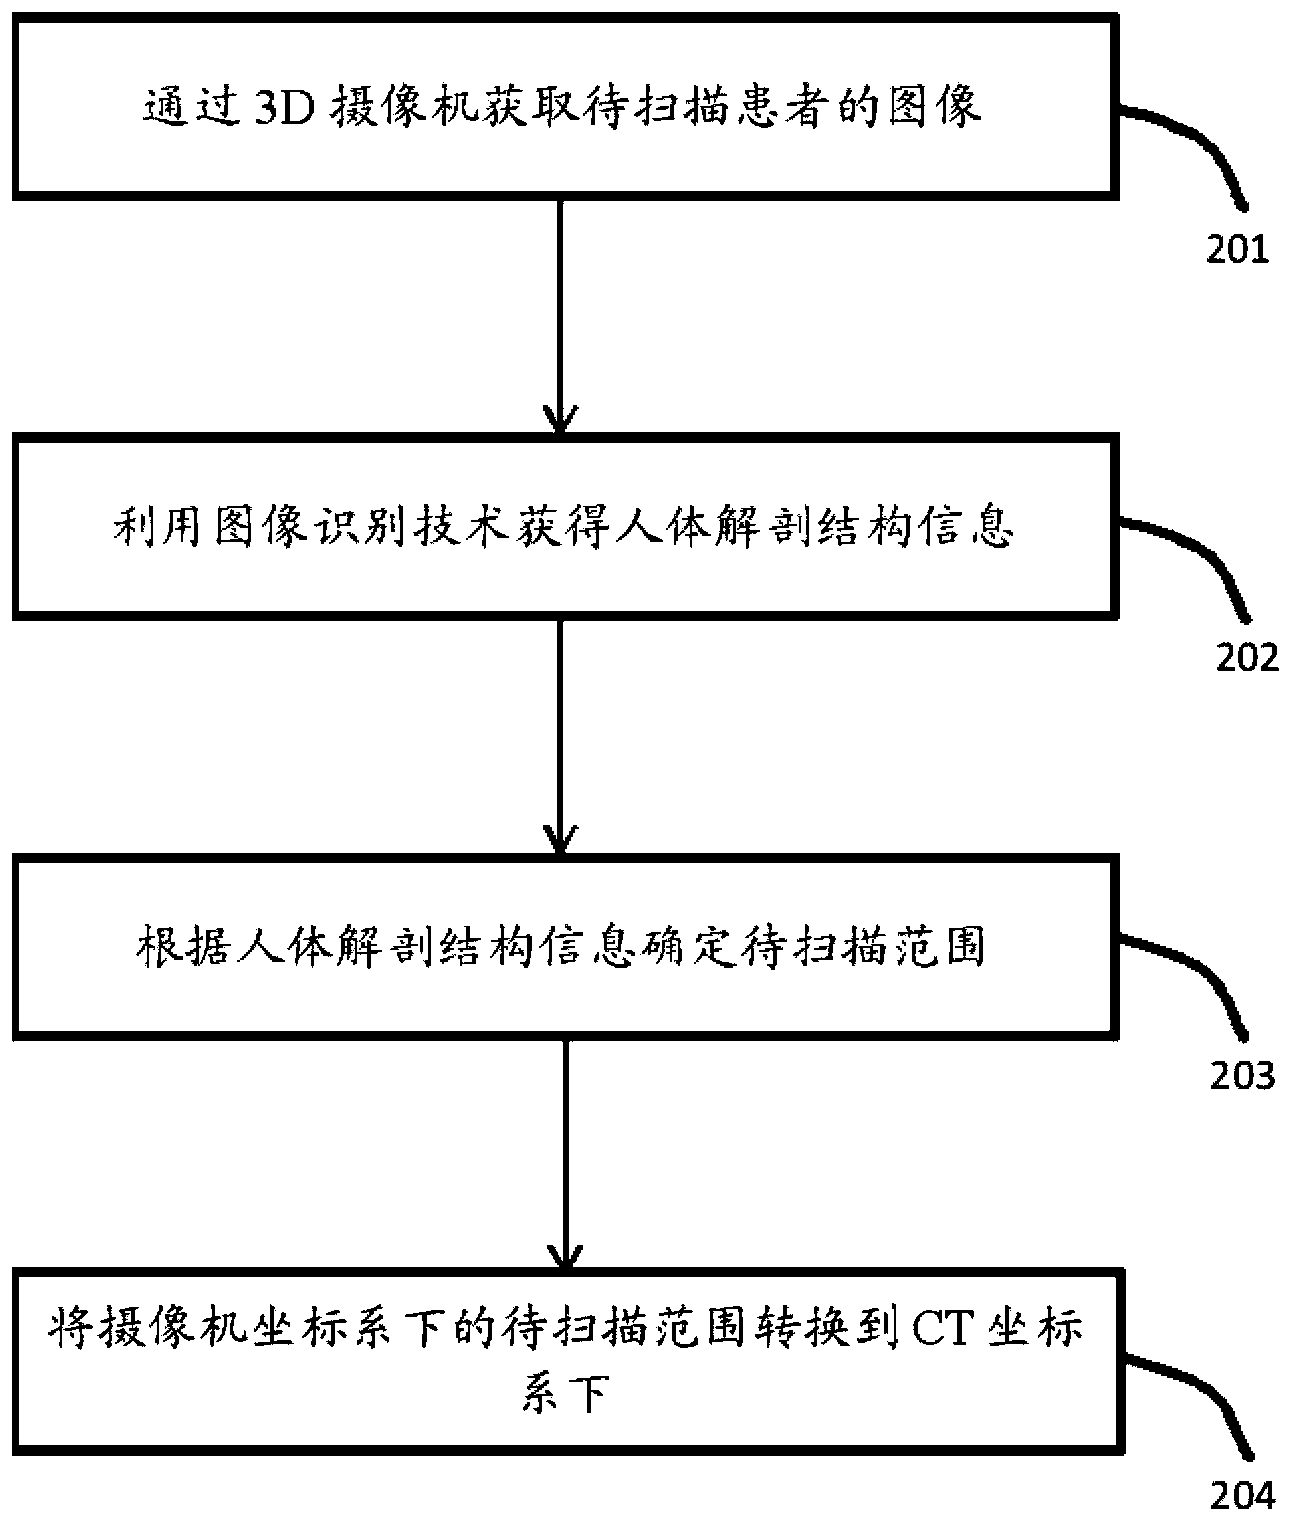 CT system, CT system scanning positioning method and CT system calibration method